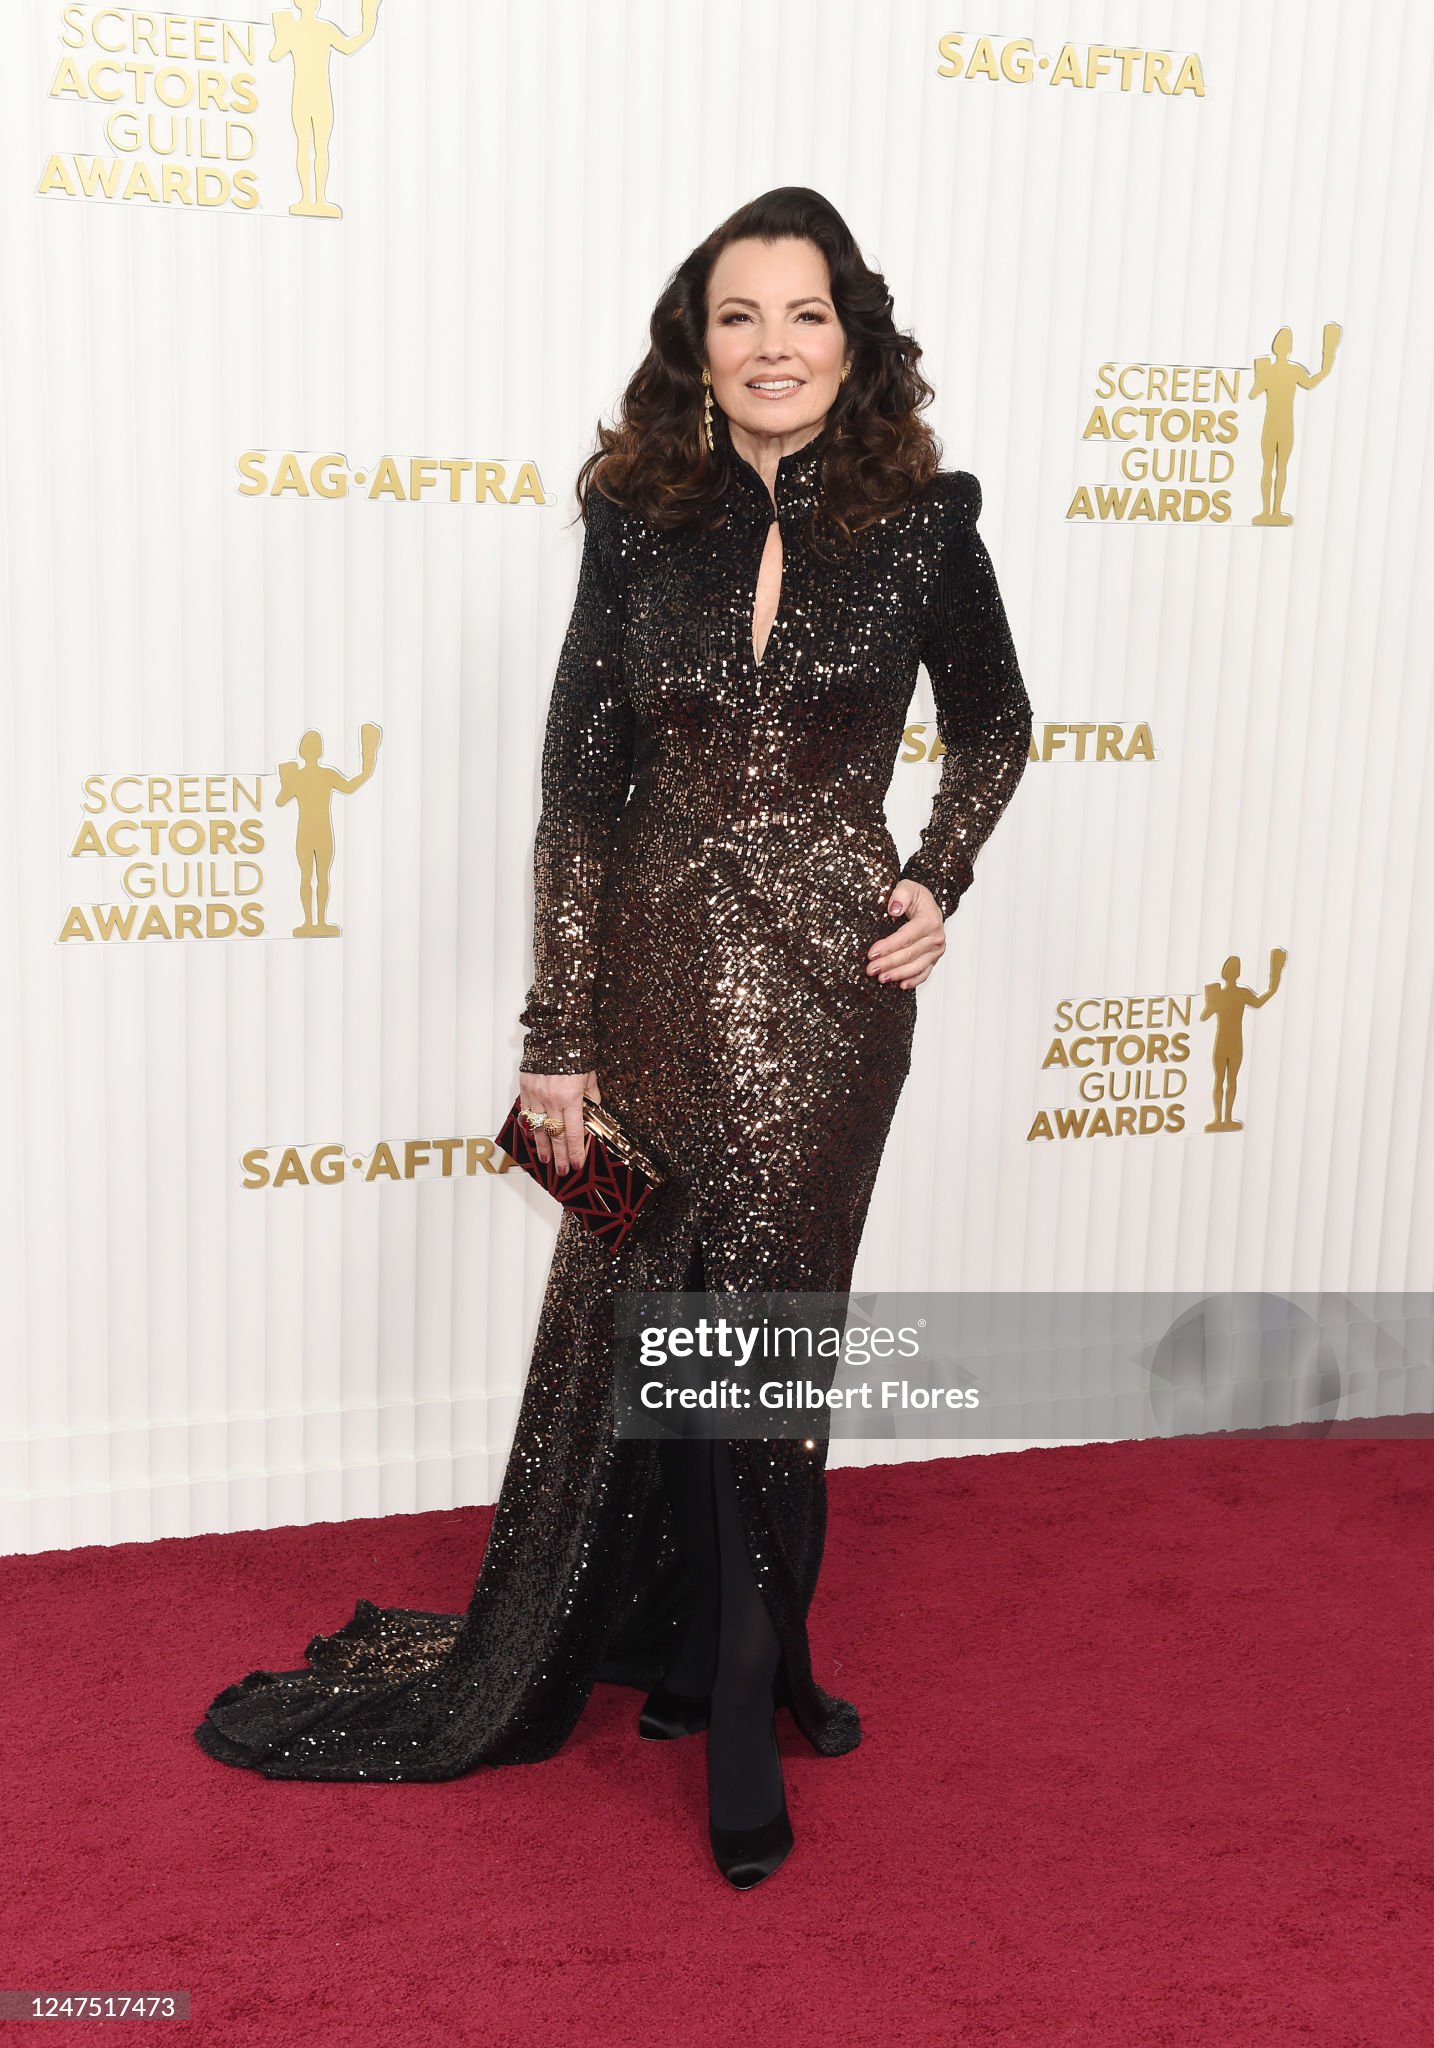 fran-drescher-at-the-29th-annual-screen-actors-guild-awards-held-at-the-fairmont-century-plaza.jpg